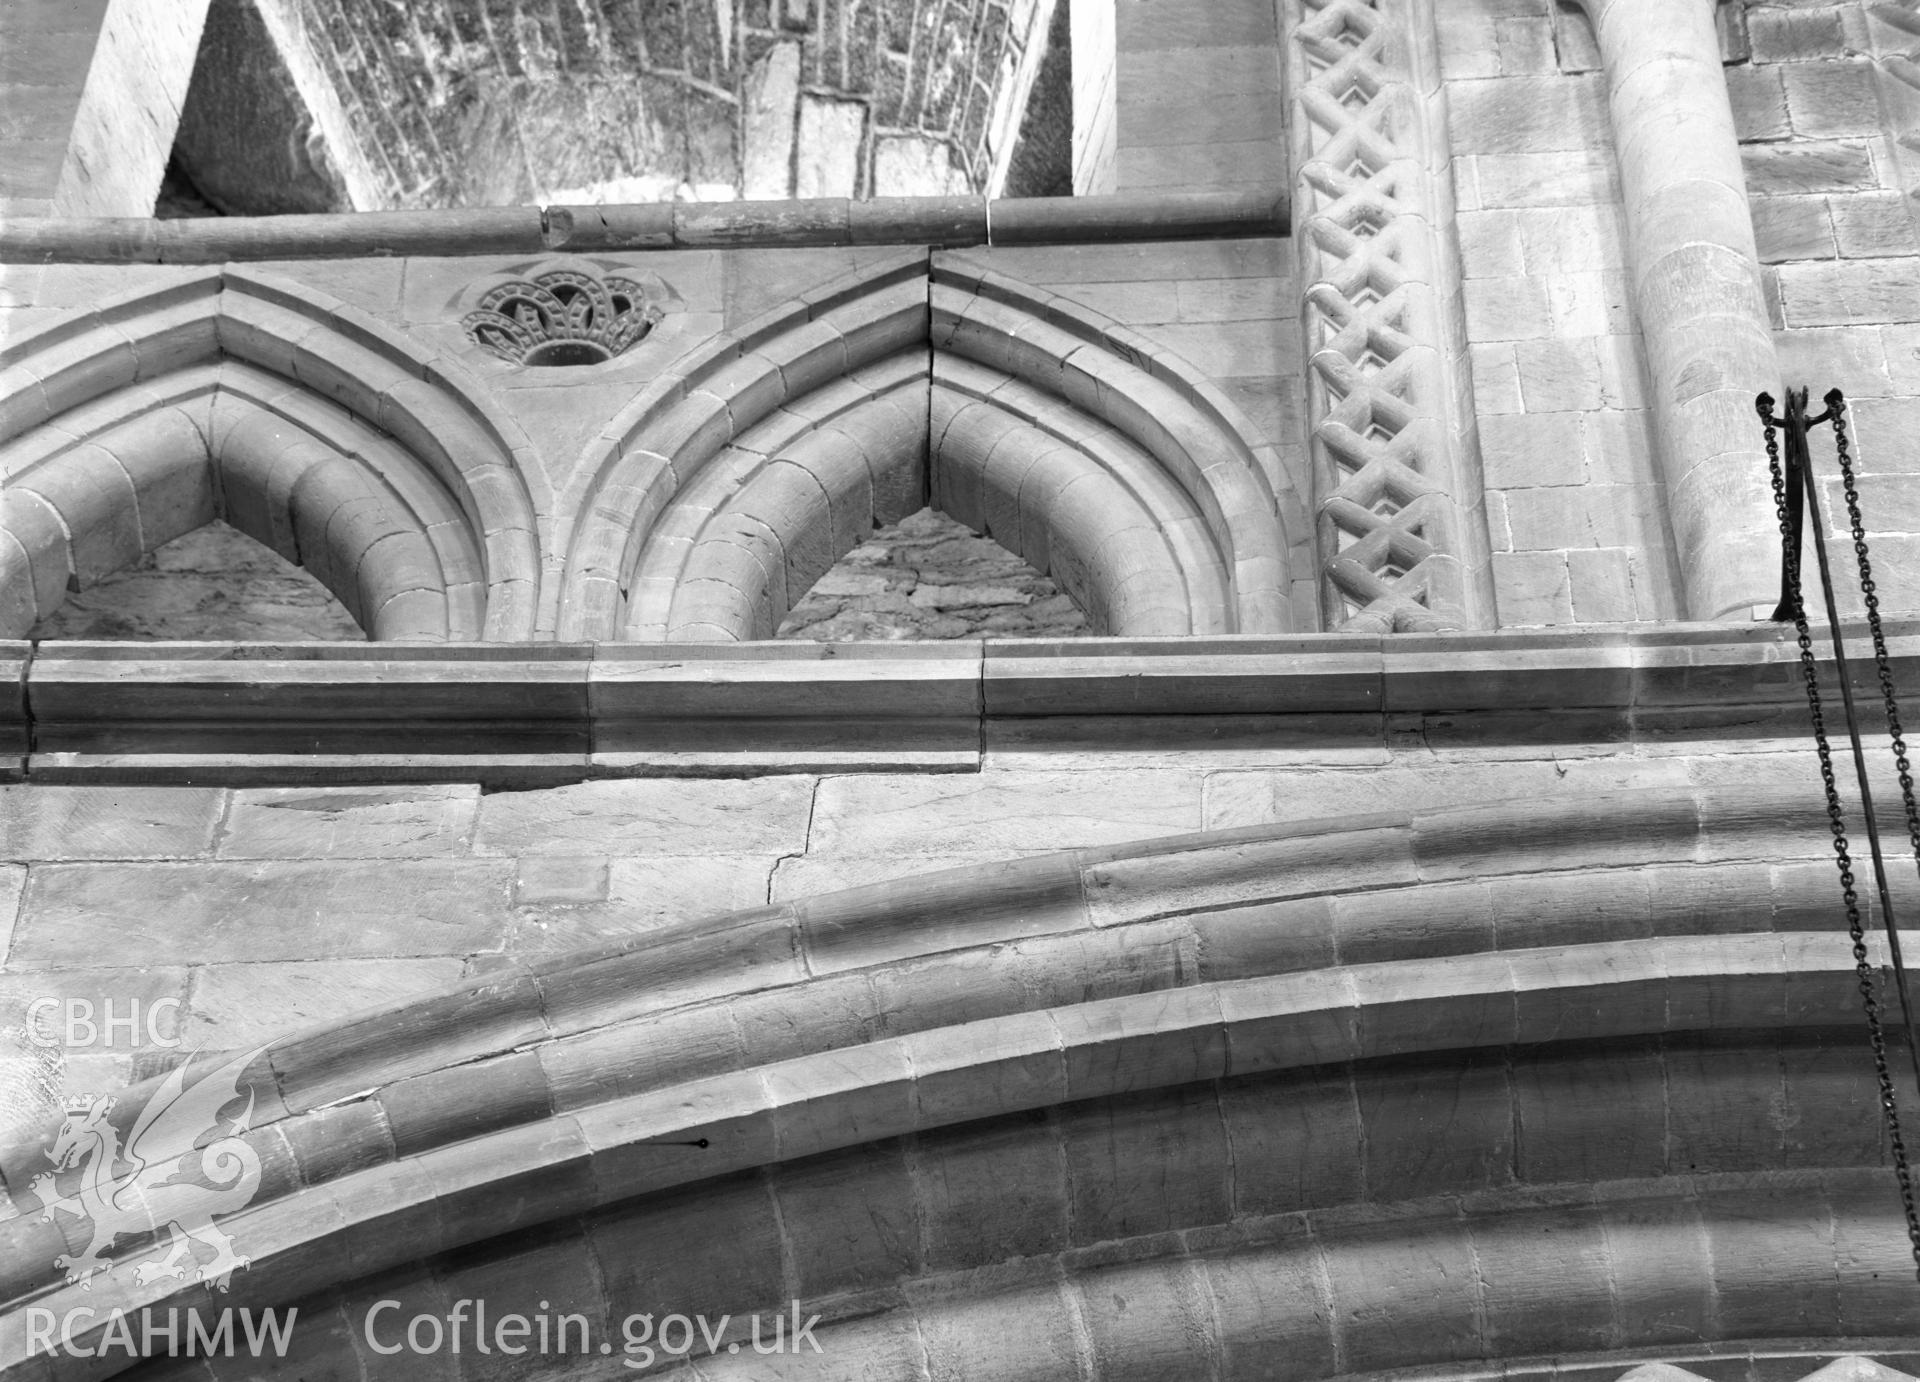 Digital copy of a black and white nitrate negative showing view of arcade above arches at St. David's Cathedral, taken by E.W. Lovegrove, July 1936.